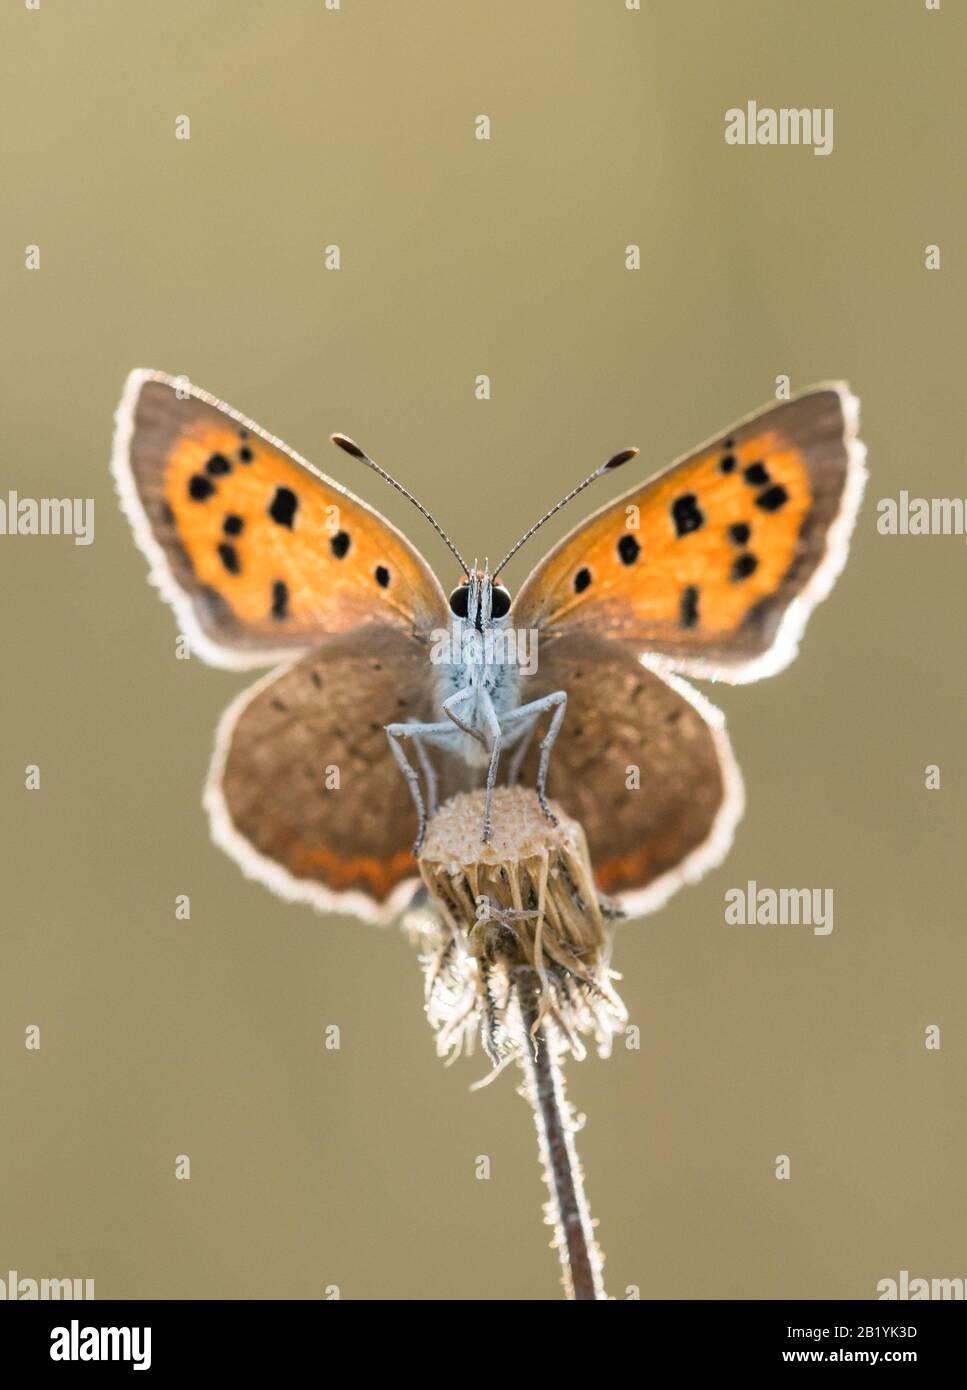 A Small Copper butterfly (Lycaena phlaeas) at rest of a plant in front of a clean background Stock Photo